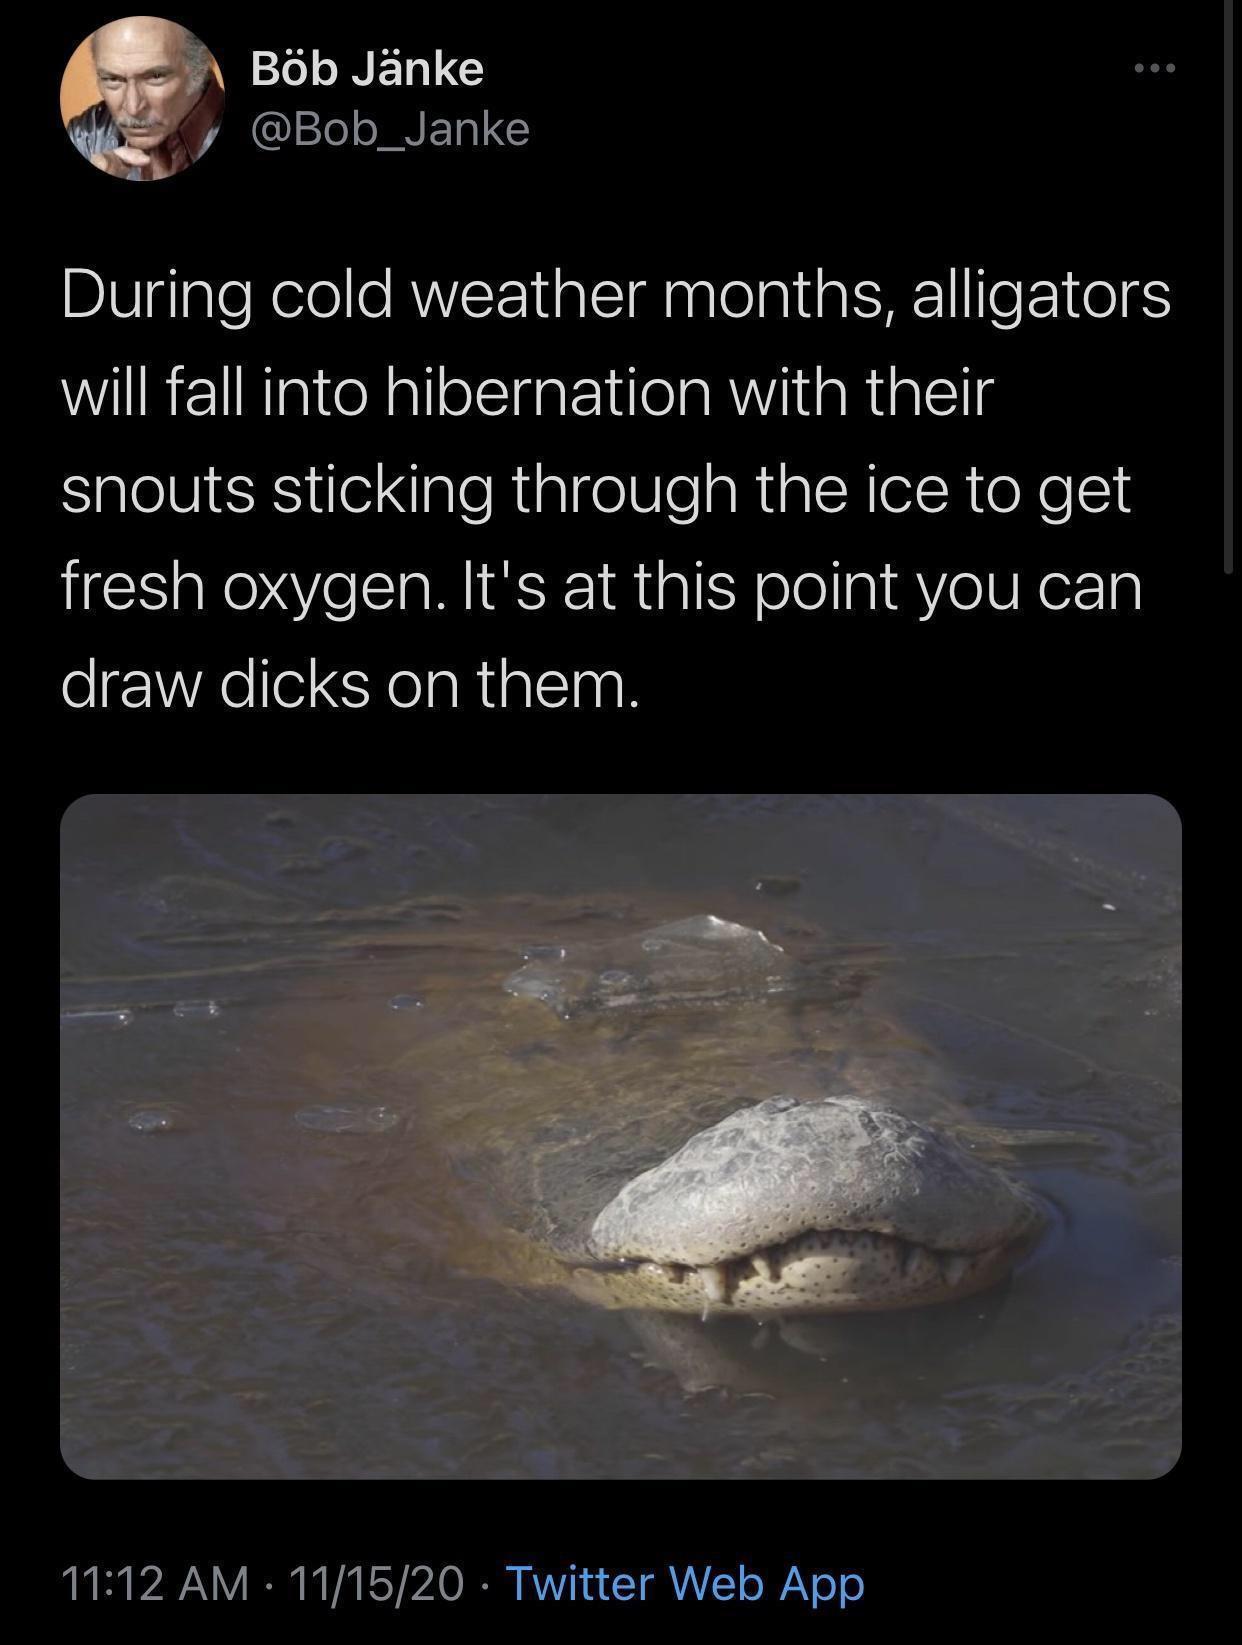 funny pics - Hibernation - Bb Jnke During cold weather months, alligators will fall into hibernation with their snouts sticking through the ice to get fresh oxygen. It's at this point you can draw dicks on them. 111520 Twitter Web App